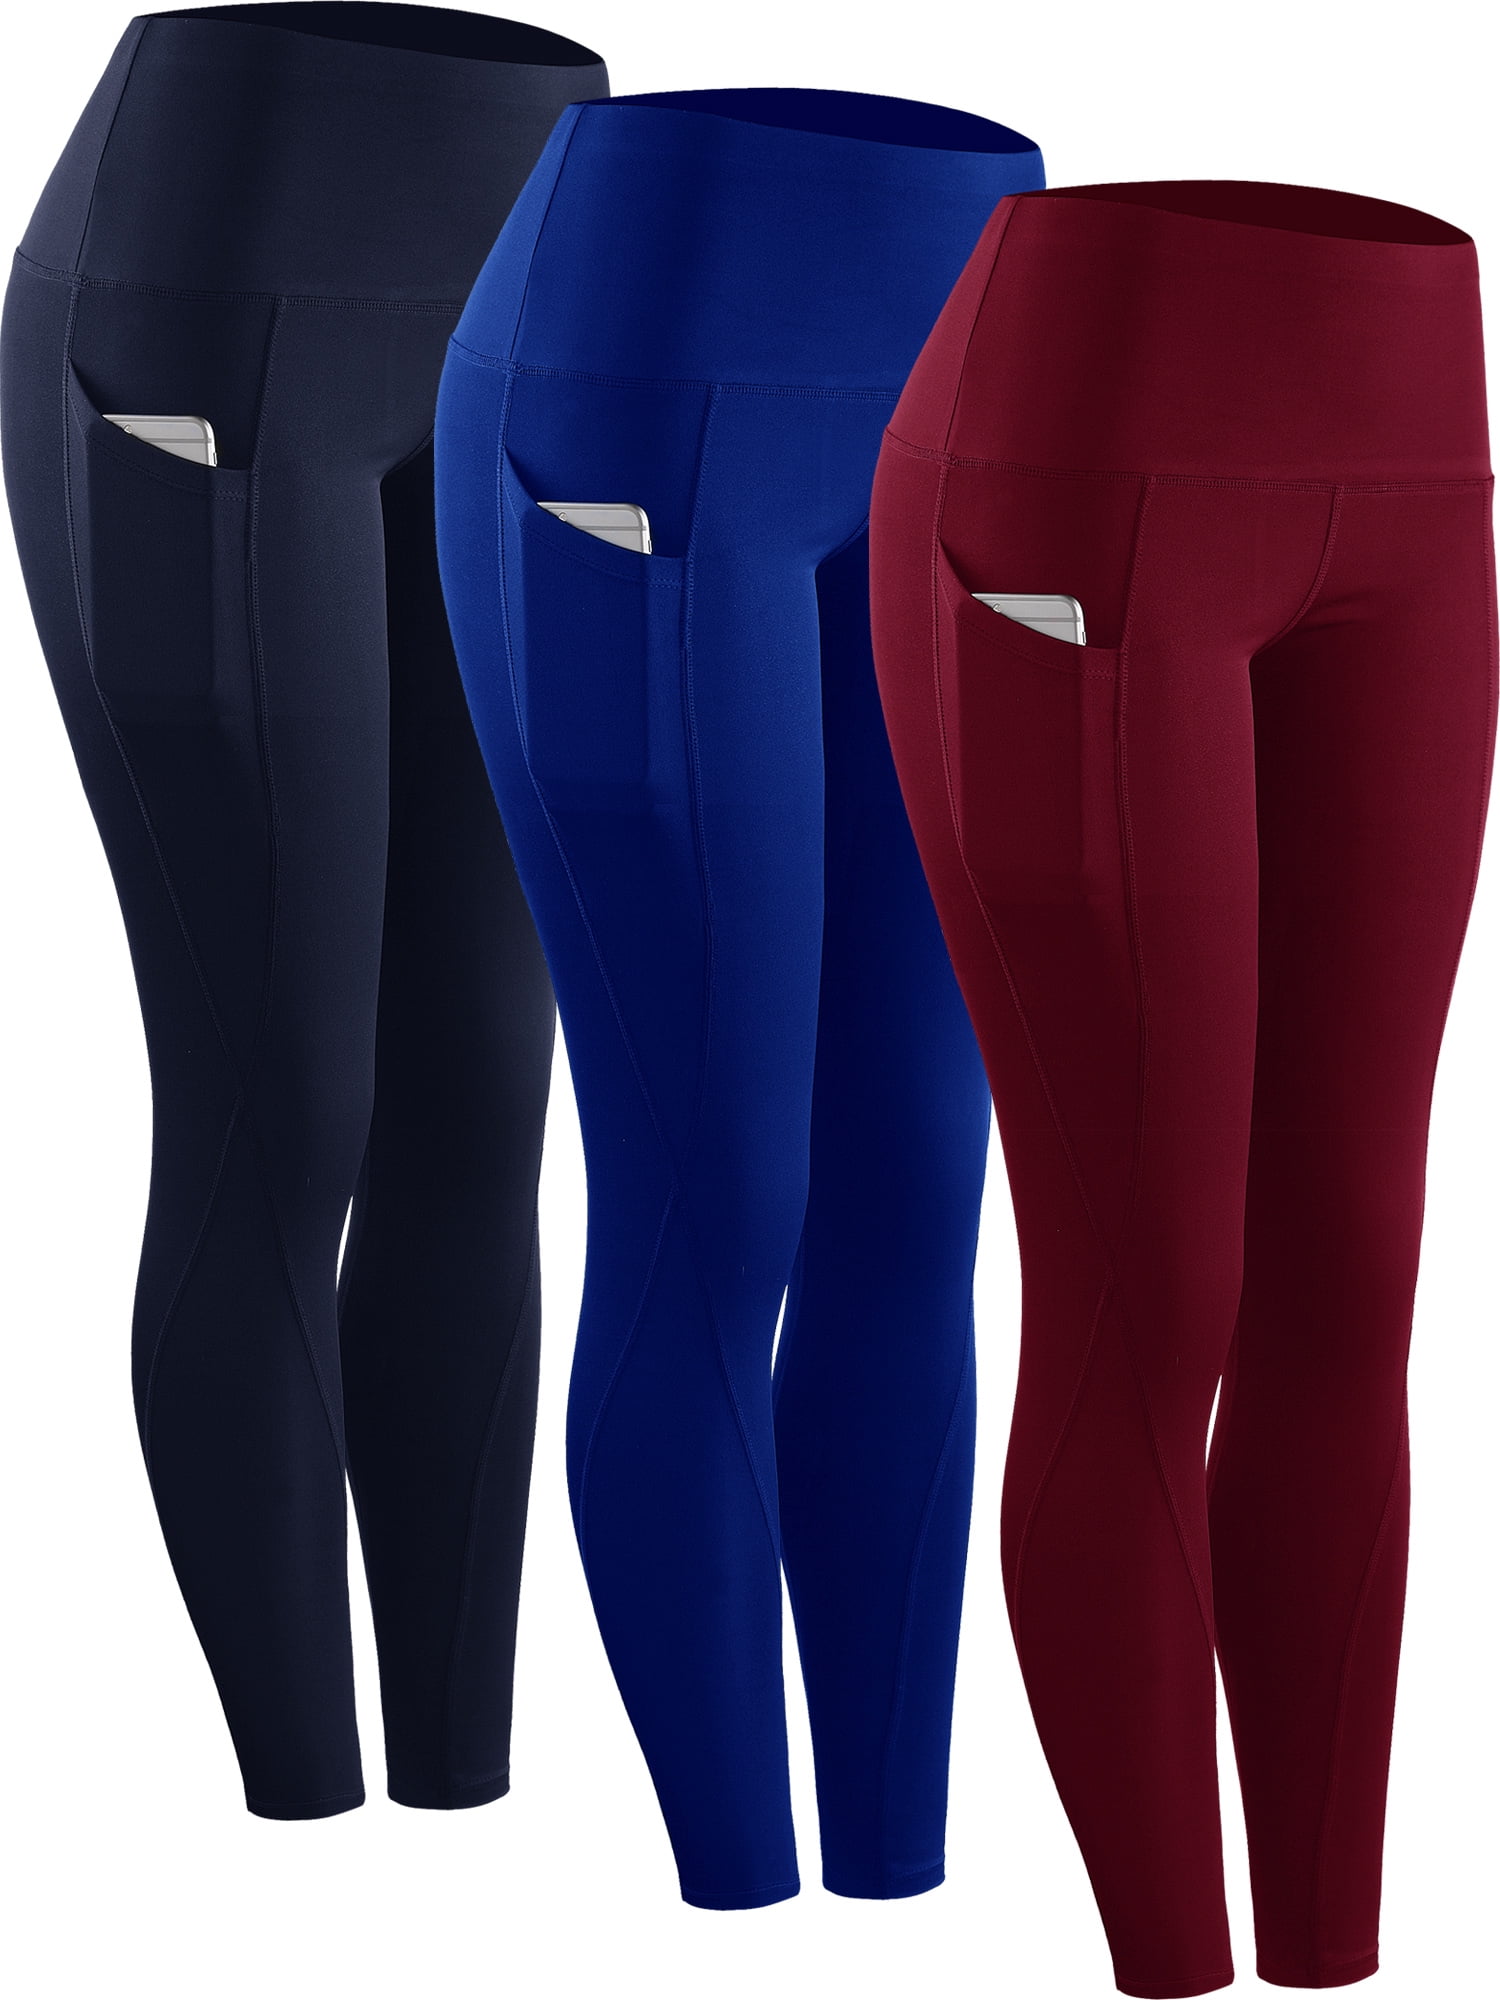 NELEUS Womens High Waist Running Workout Yoga Leggings with Pockets,Navy  Blue+Blue+Red,US Size S 